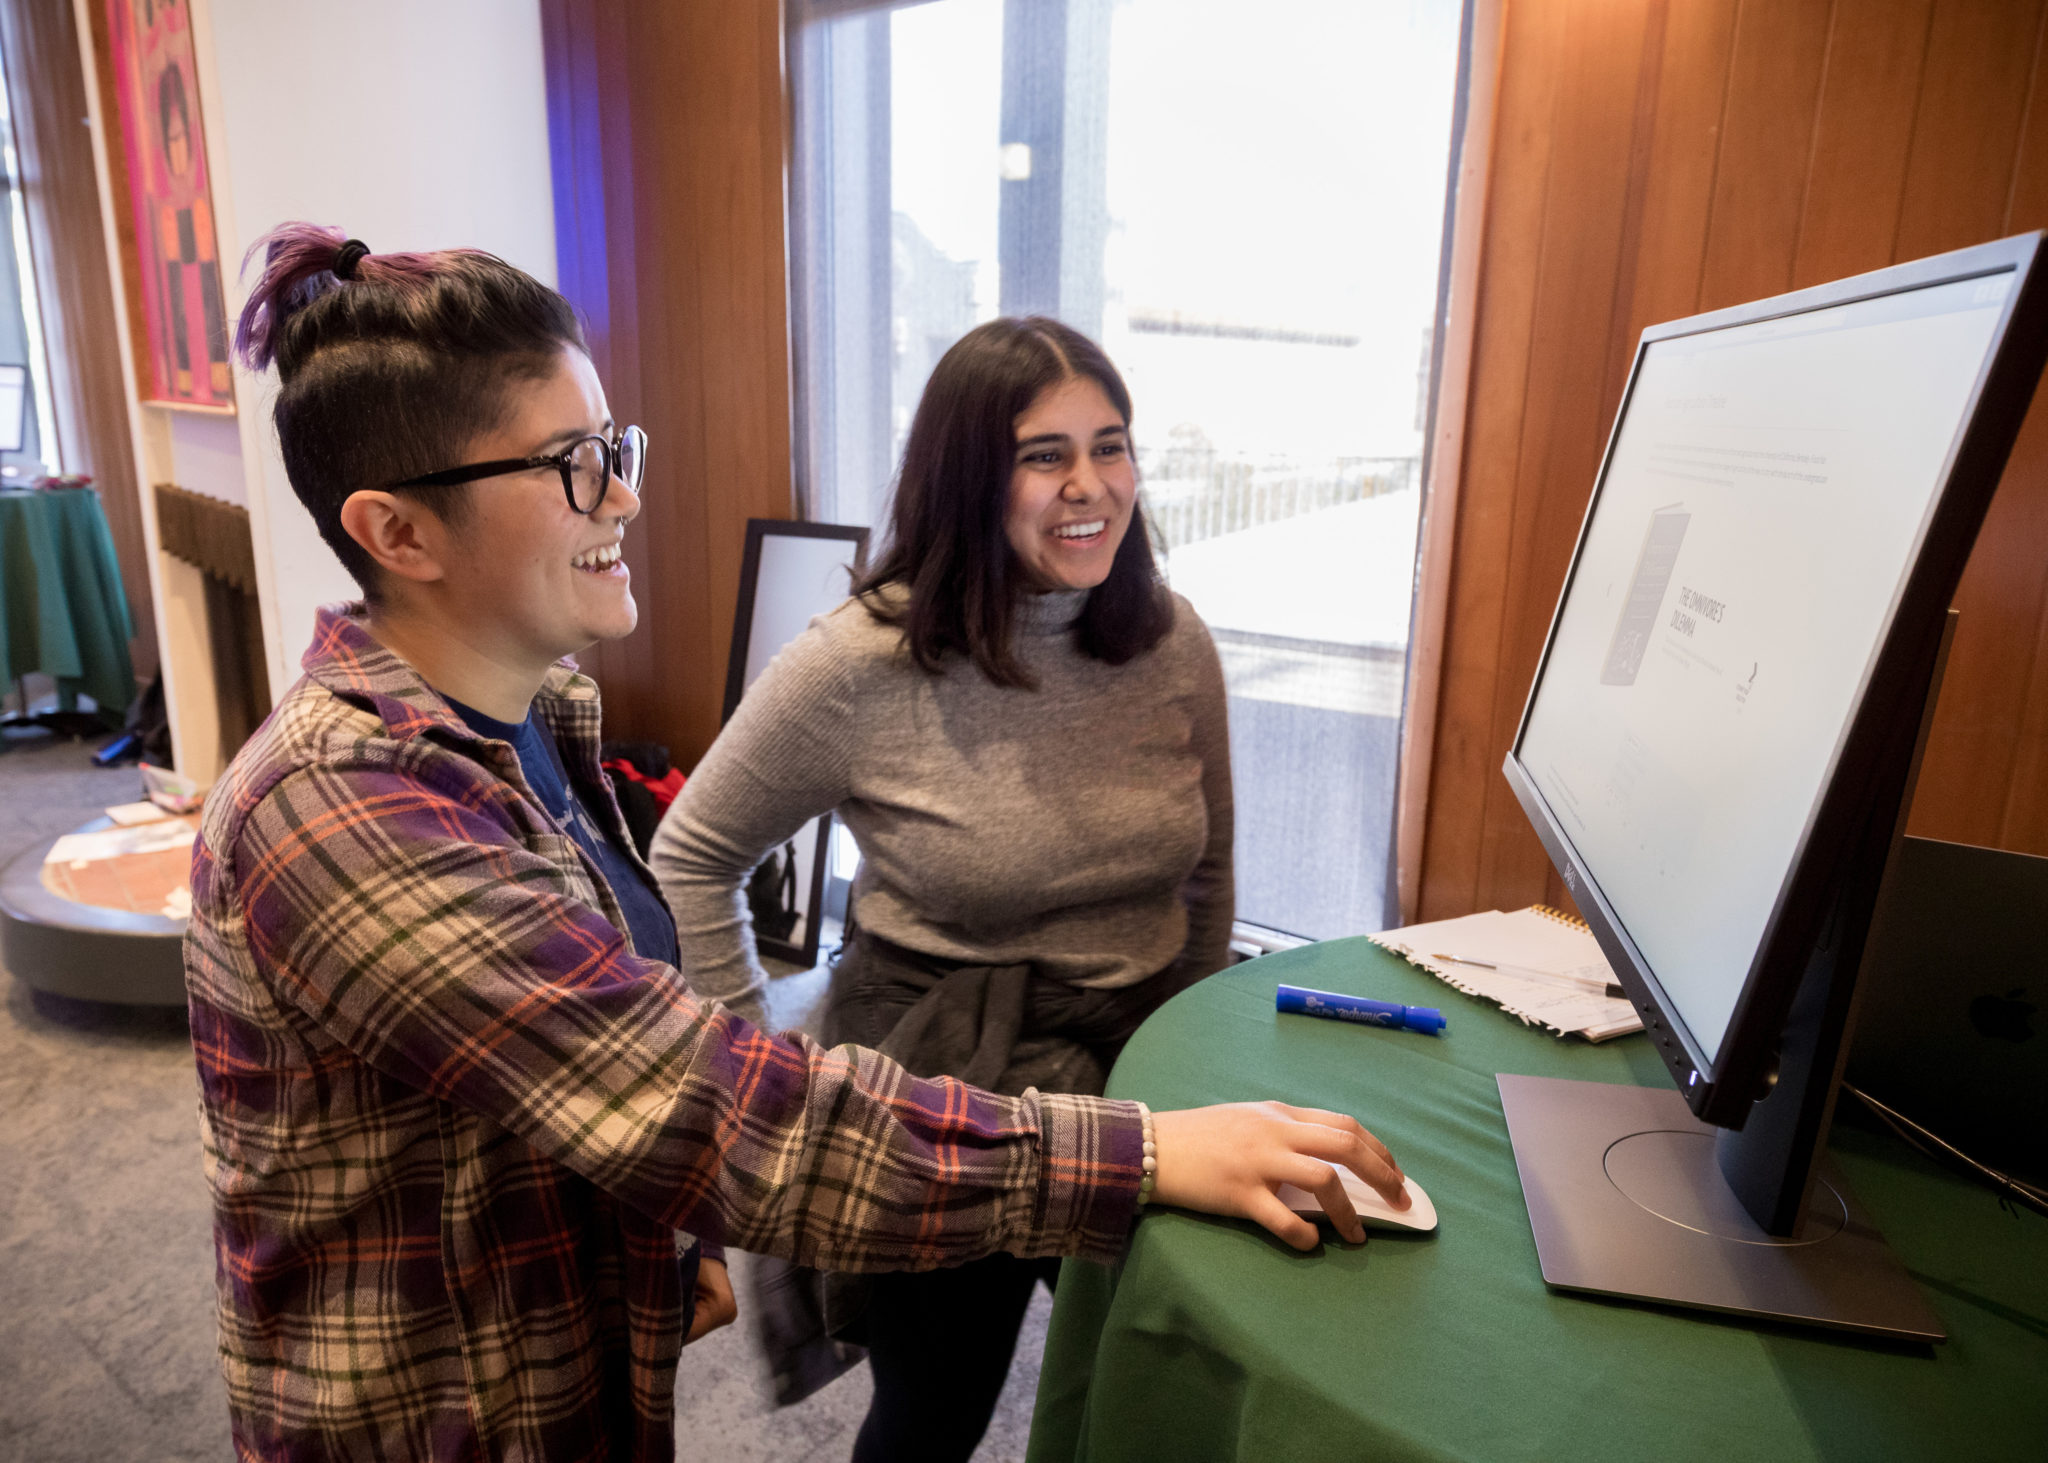 Two students standing at a computer.